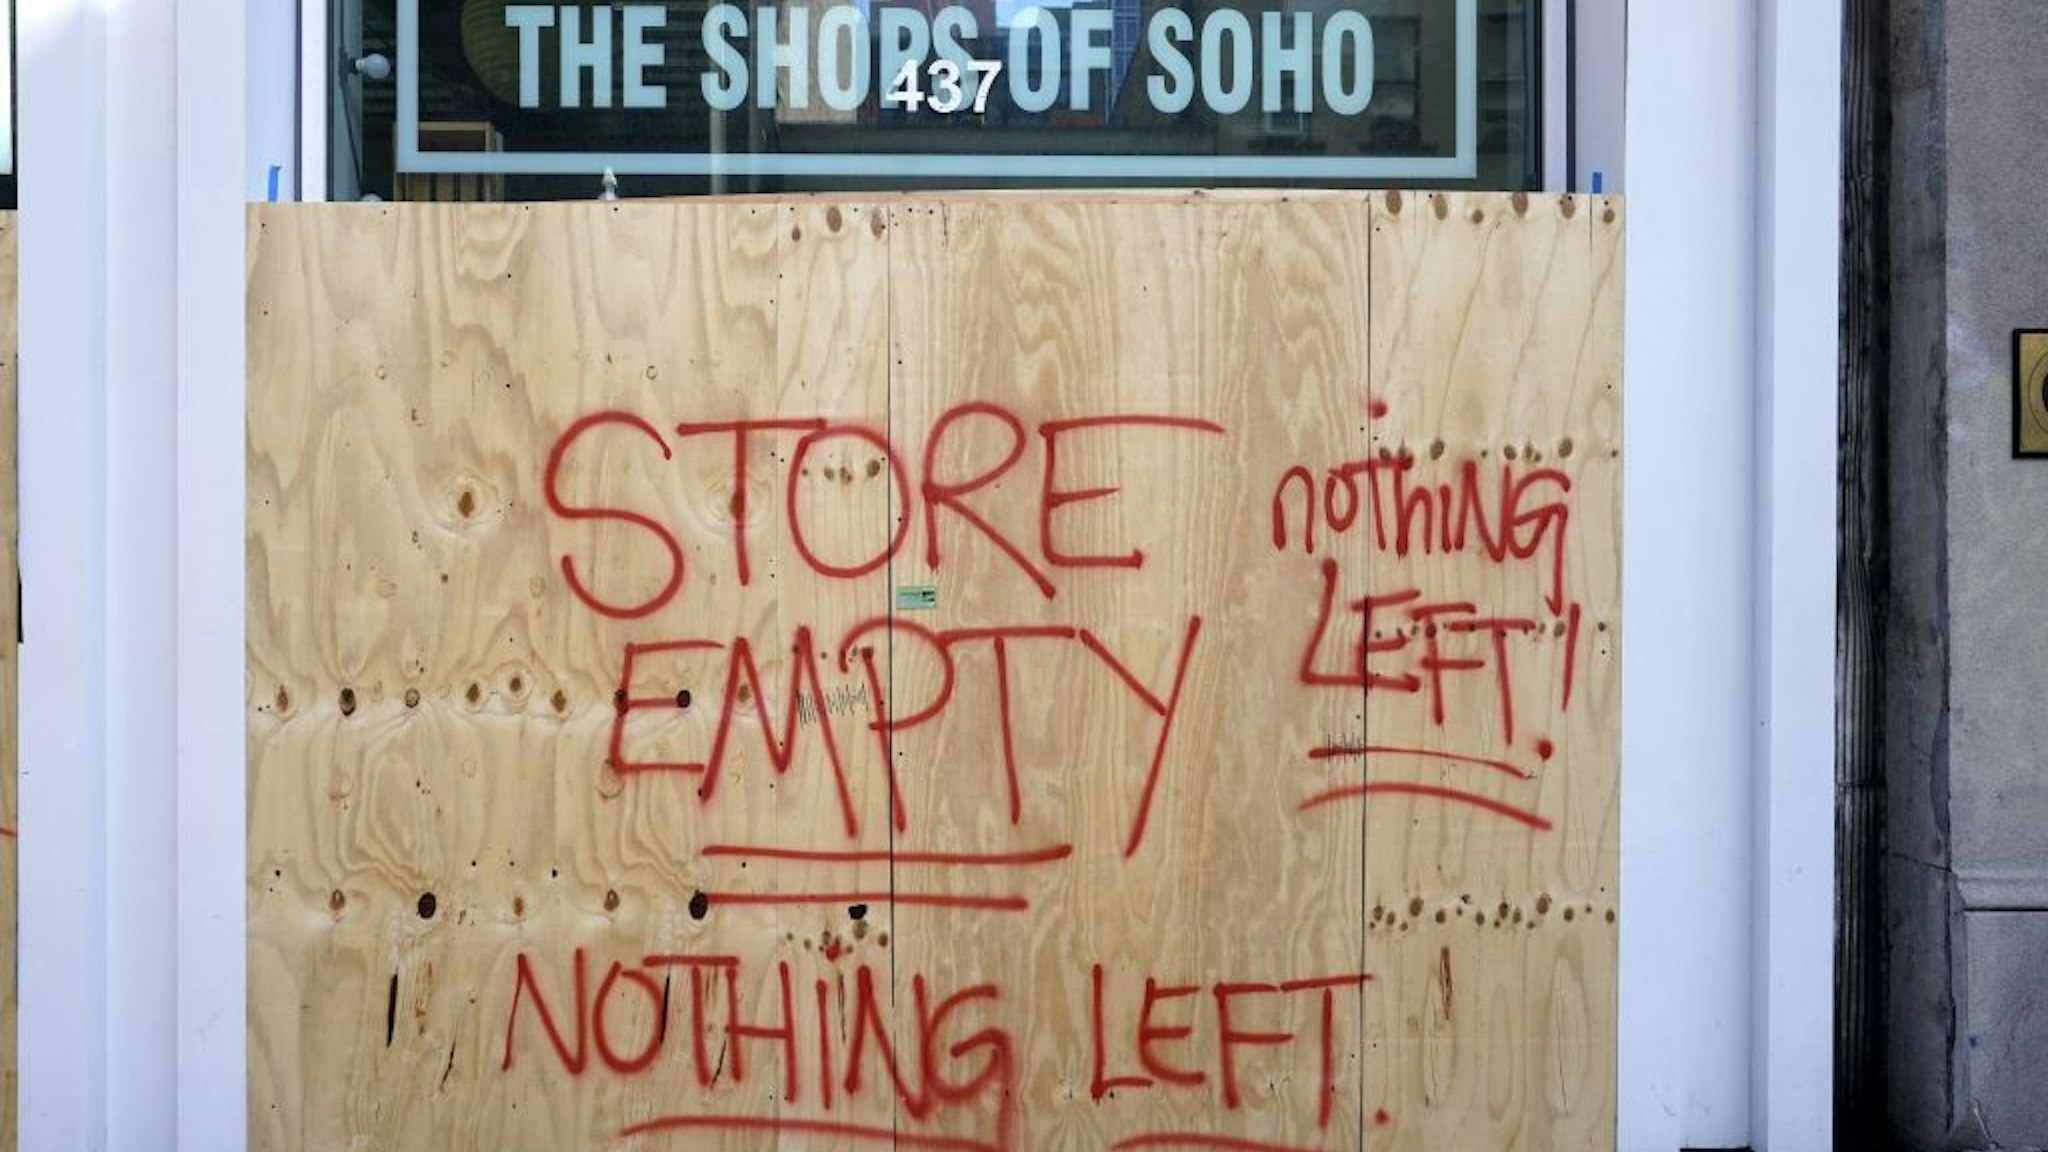 The Shoes of Soho store is seen boarded up on June 8, 2020 after rampant open looting and vandalism in New York, following the Minneapolis police killing of George Floyd.